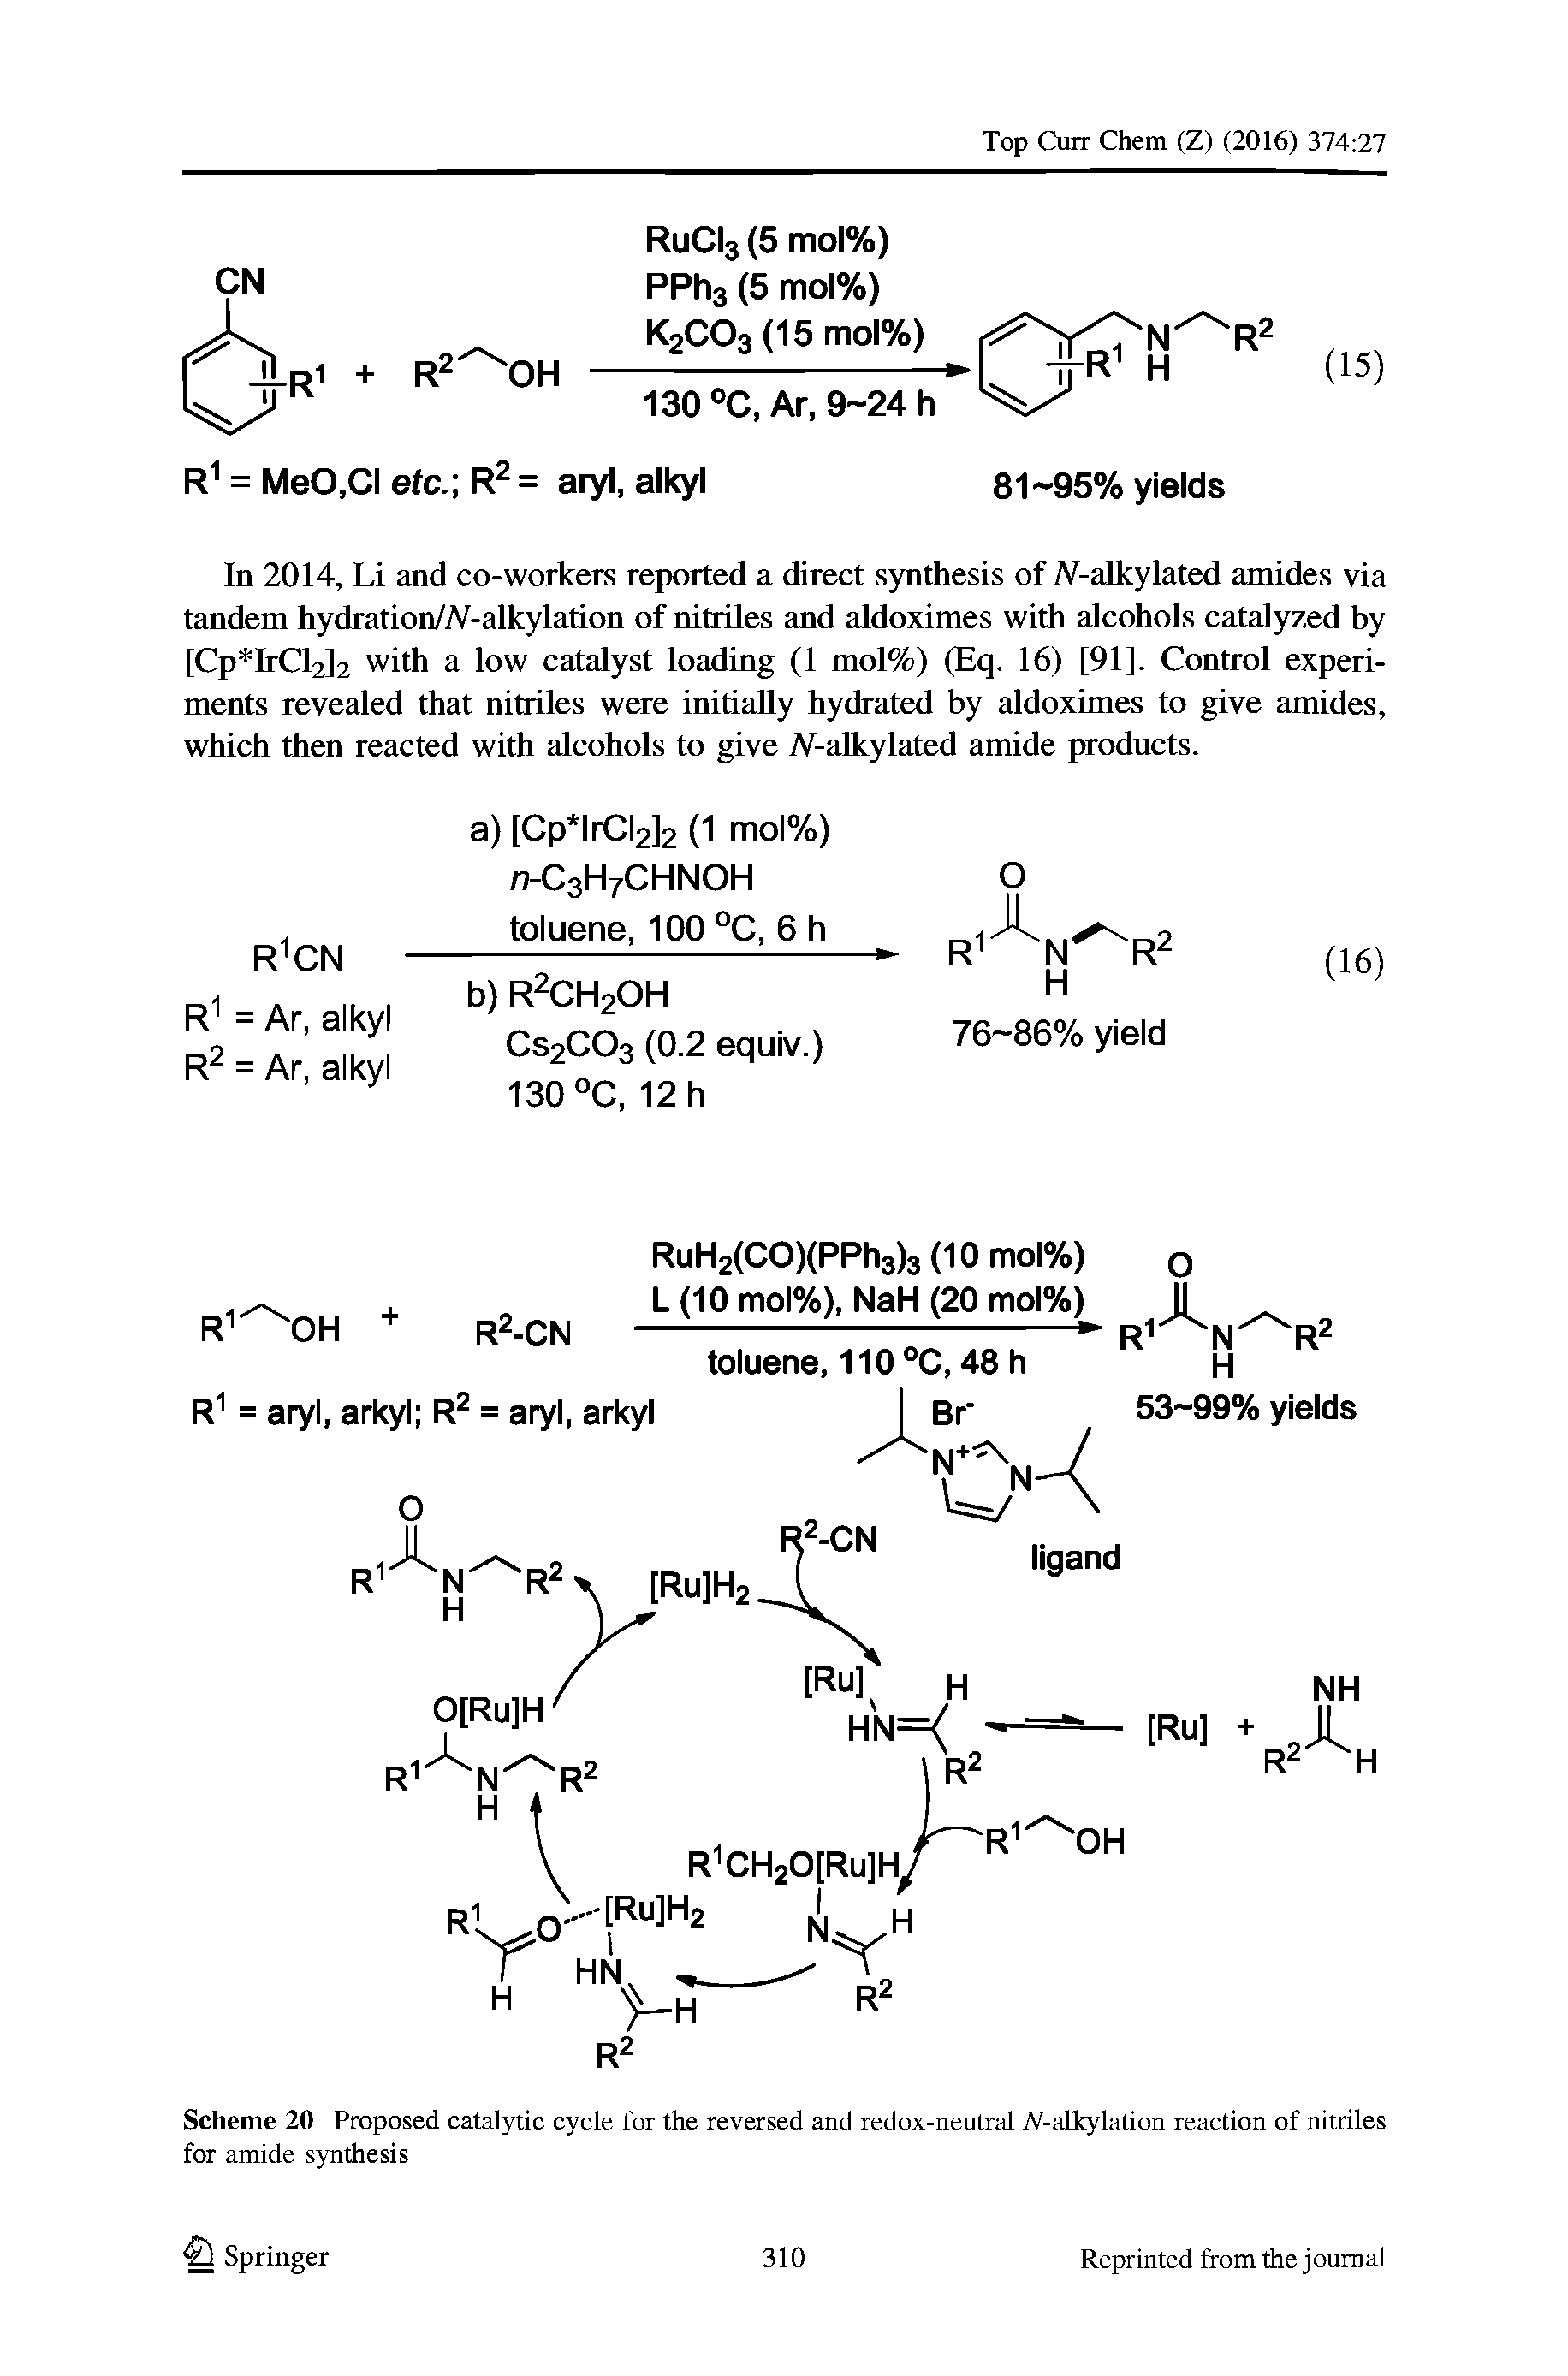 Scheme 20 Proposed catalytic cycle for the reversed and redox-neutral A -alkylation reaction of nitriles for amide synthesis...